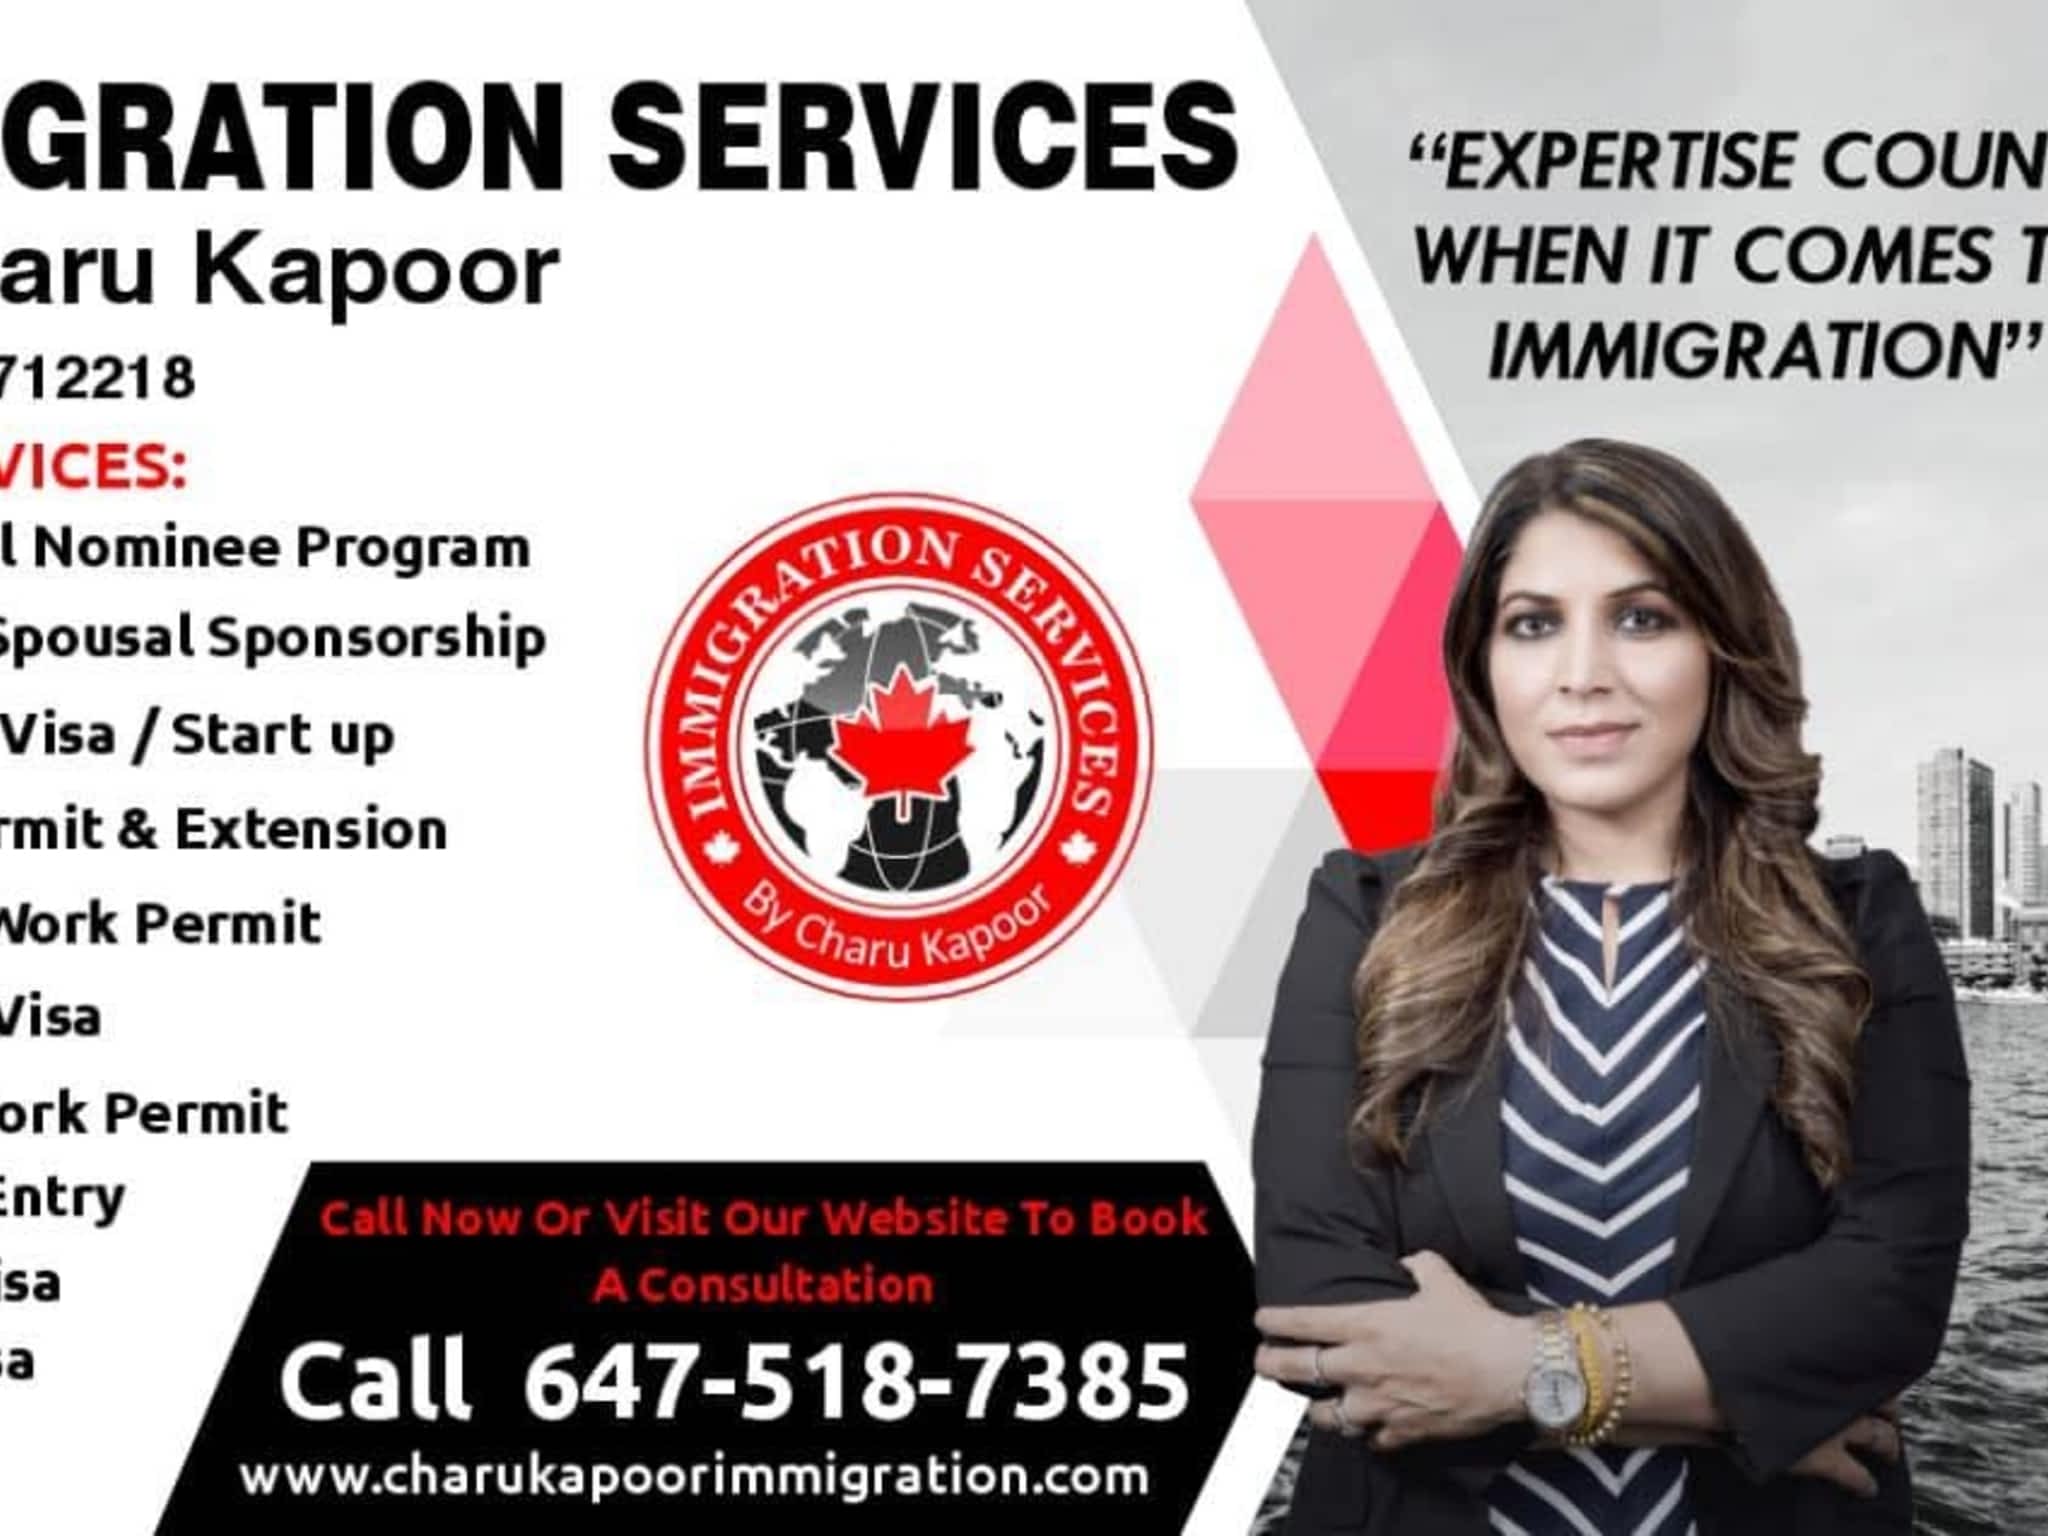 photo Immigration Services by Charu Kapoor LTD